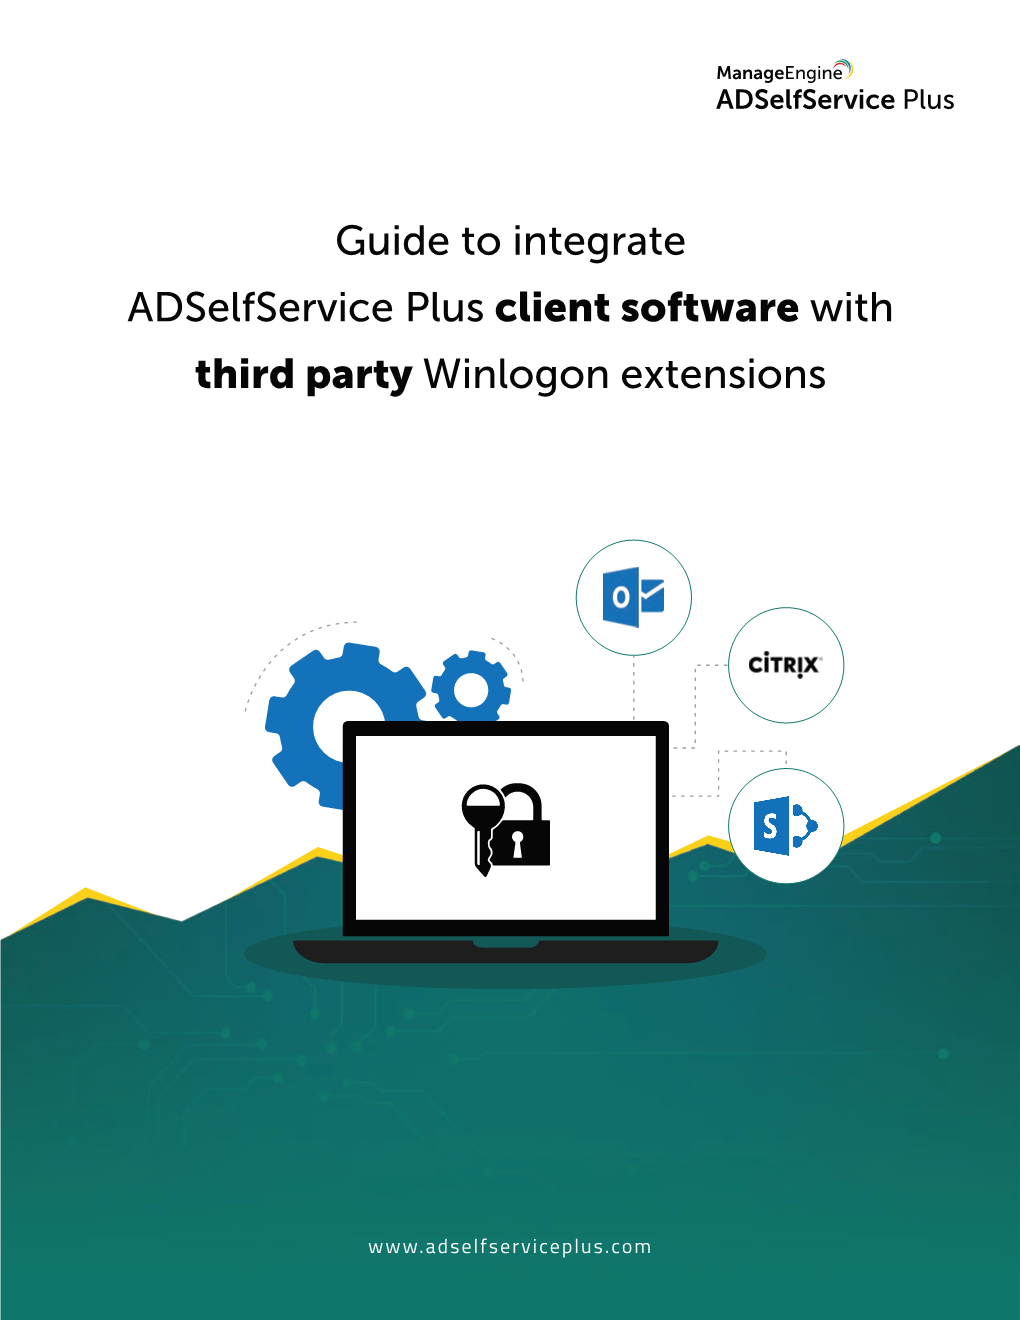 Guide to Integrate Adselservice Plus Client Software with Third Party